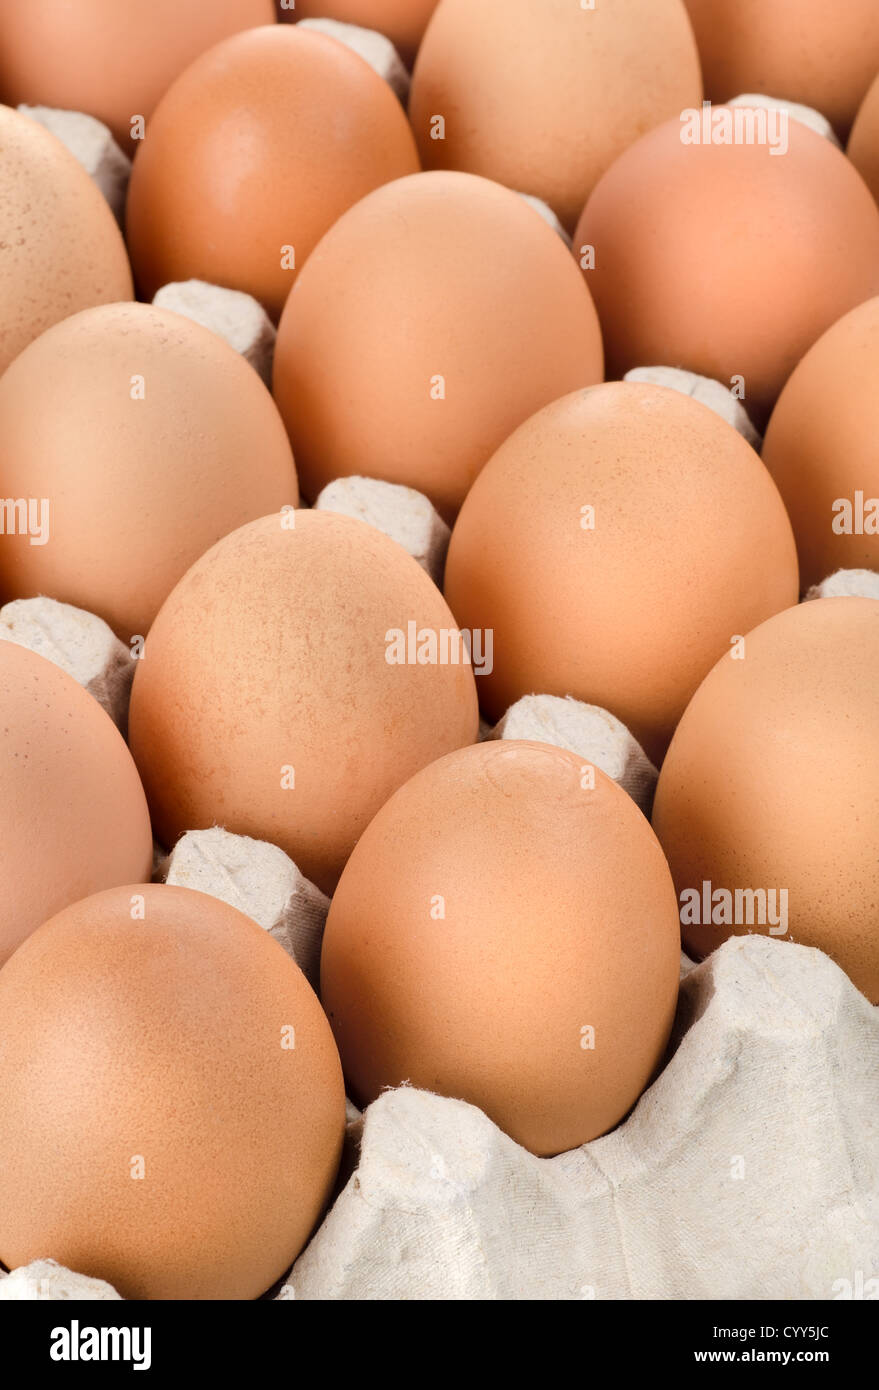 Chicken eggs of brown color in cardboard tray Stock Photo